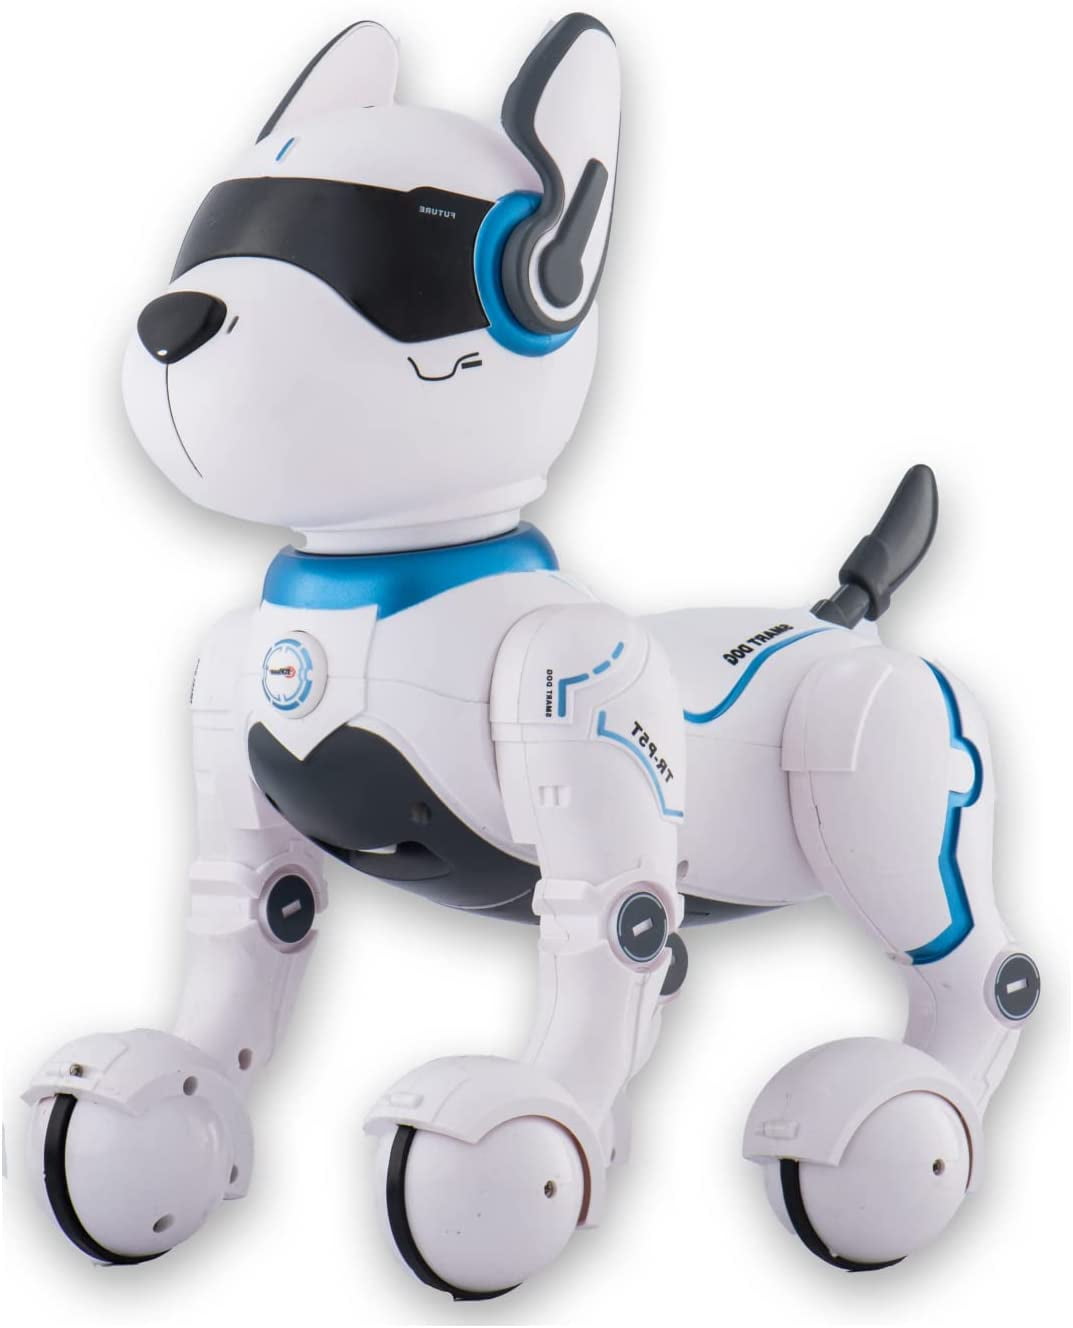 Buy Remote Control Robot Dog Toy